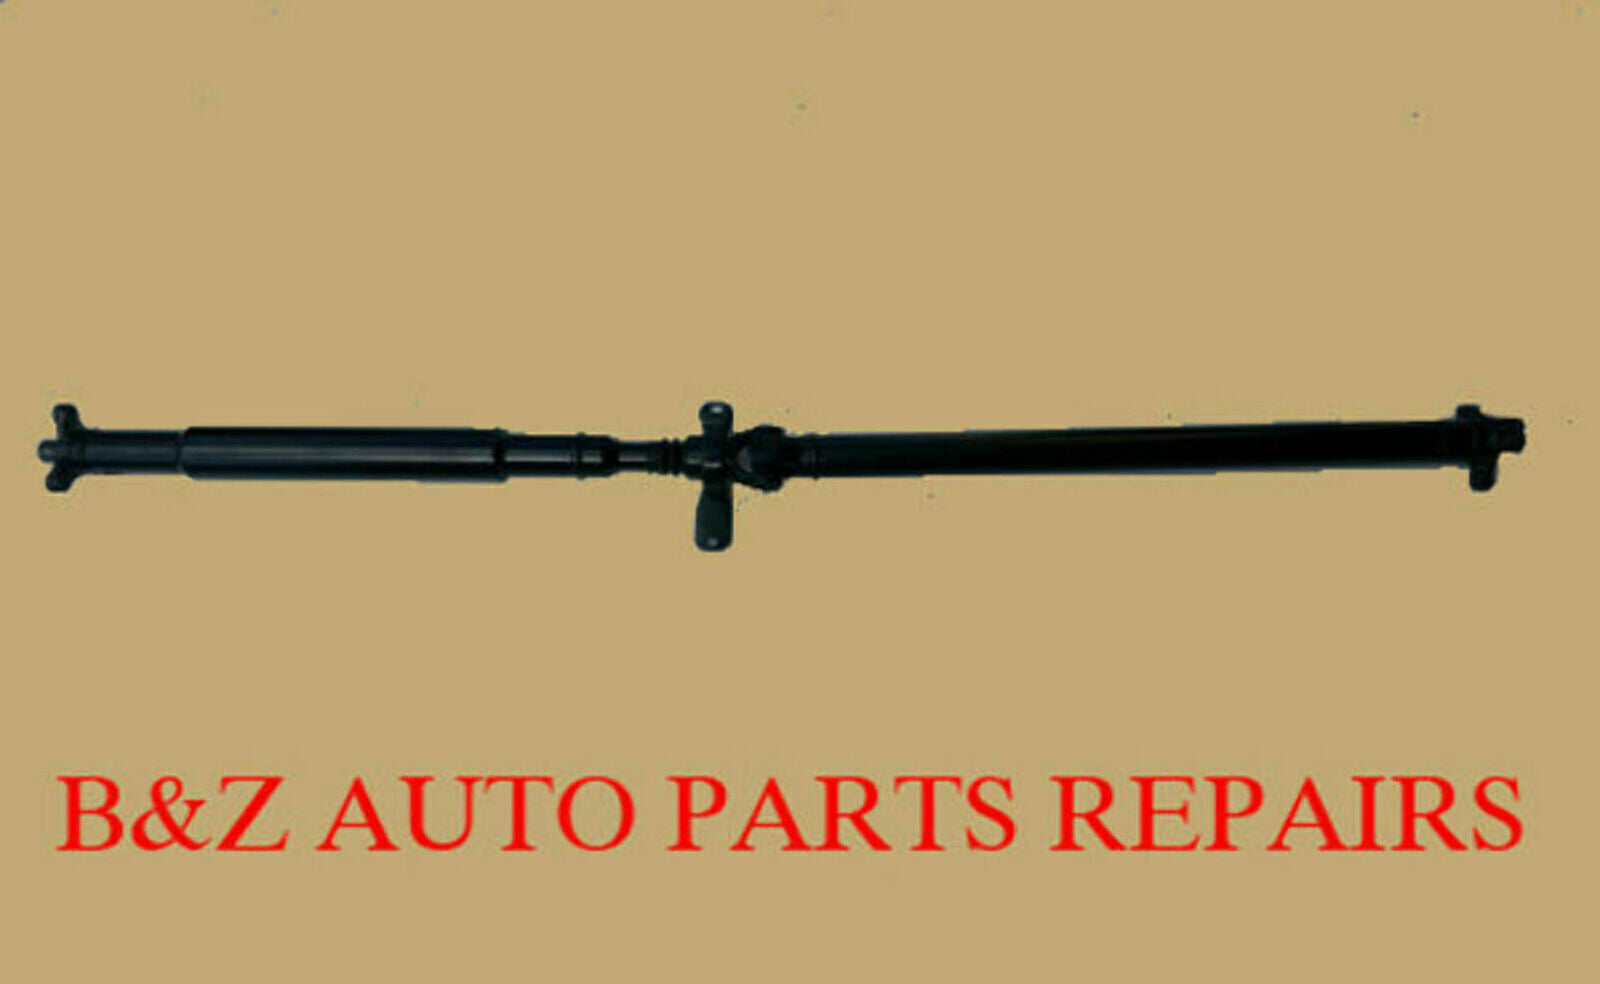 2010 Holden Commodore VE Manual 3L Wagon Reconditioned Tailshaft | B & Z Tailshafts